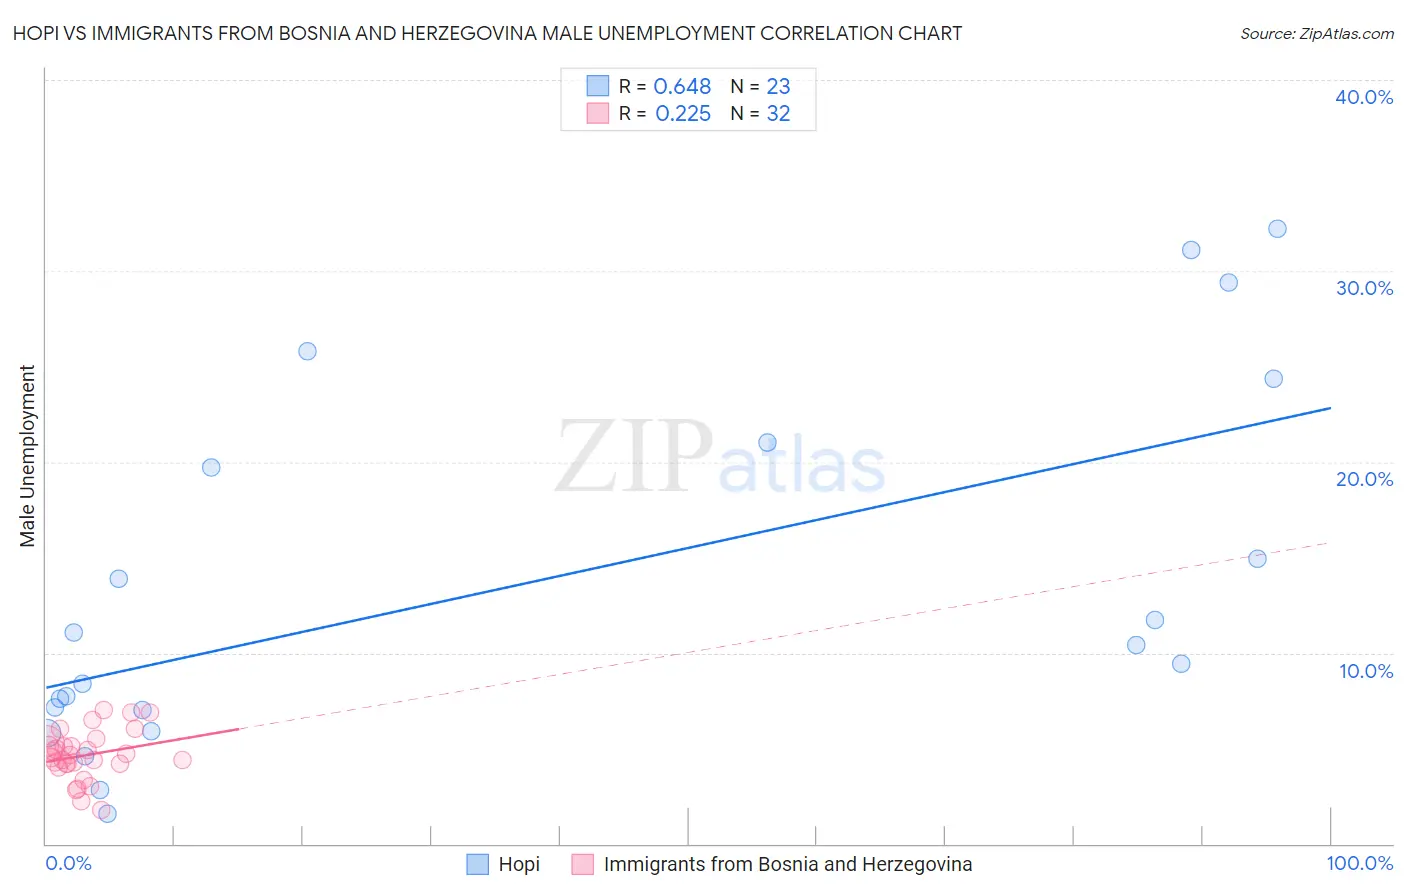 Hopi vs Immigrants from Bosnia and Herzegovina Male Unemployment